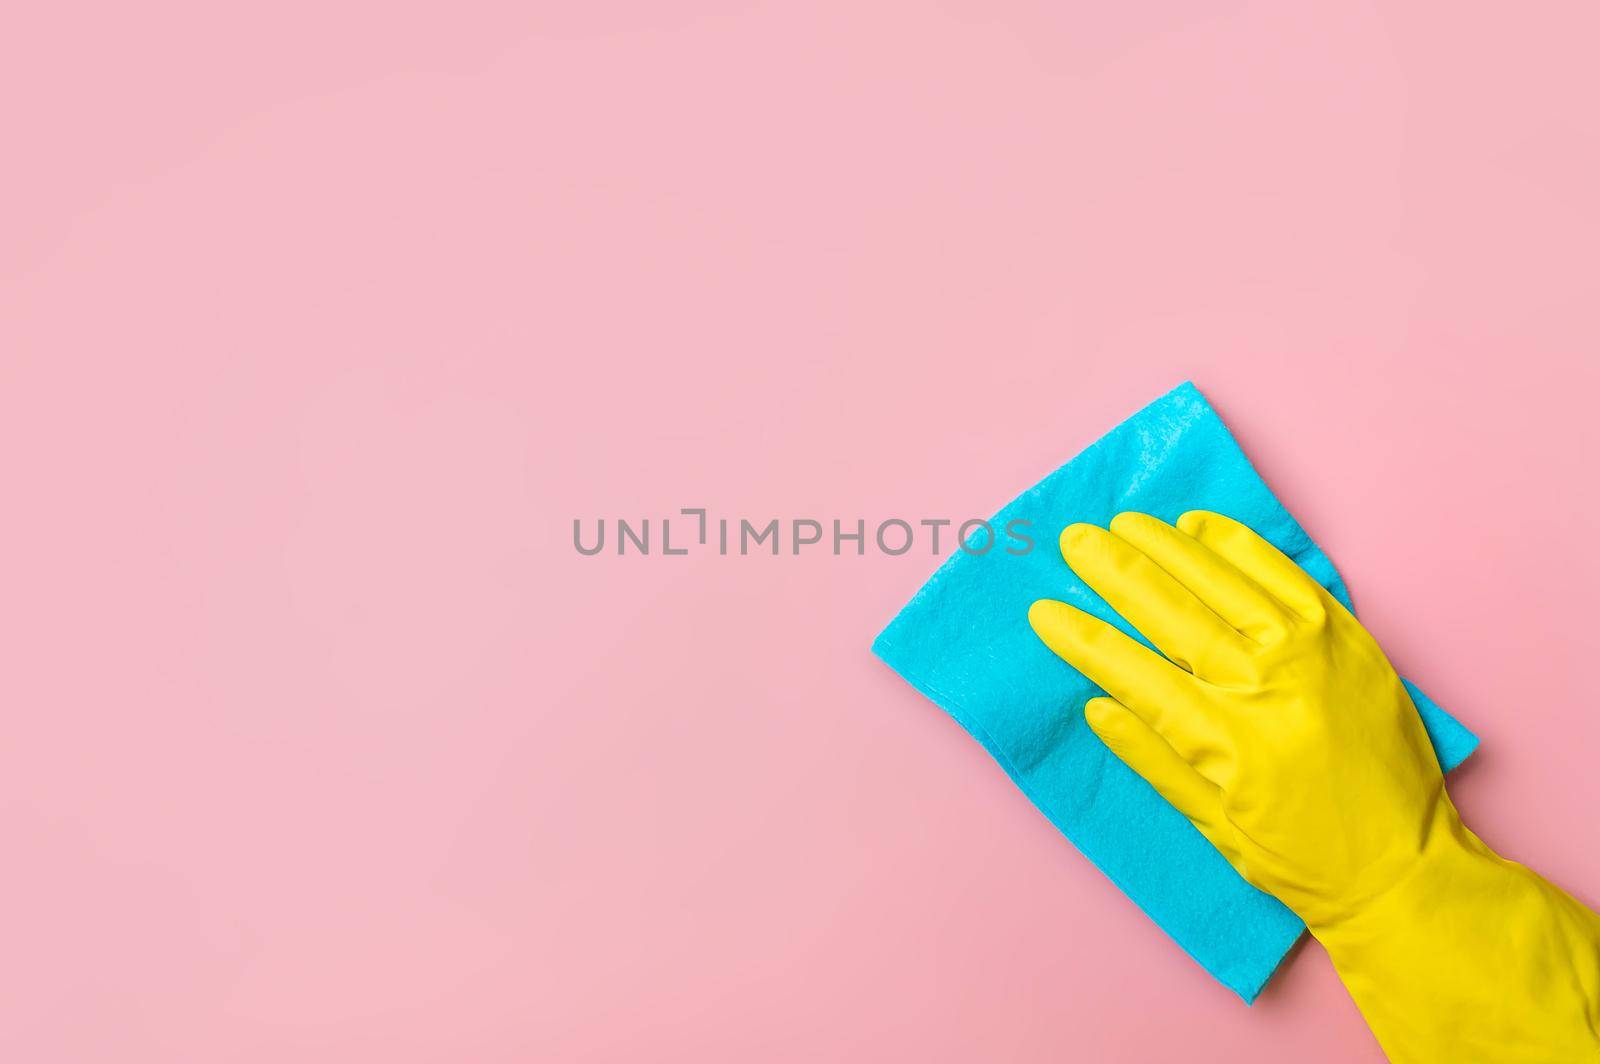 Employee hand in yellow rubber protective glove hold blue rag wiping pink wall background. House cleaning service, general or regular cleanup concept. Empty place for text or design